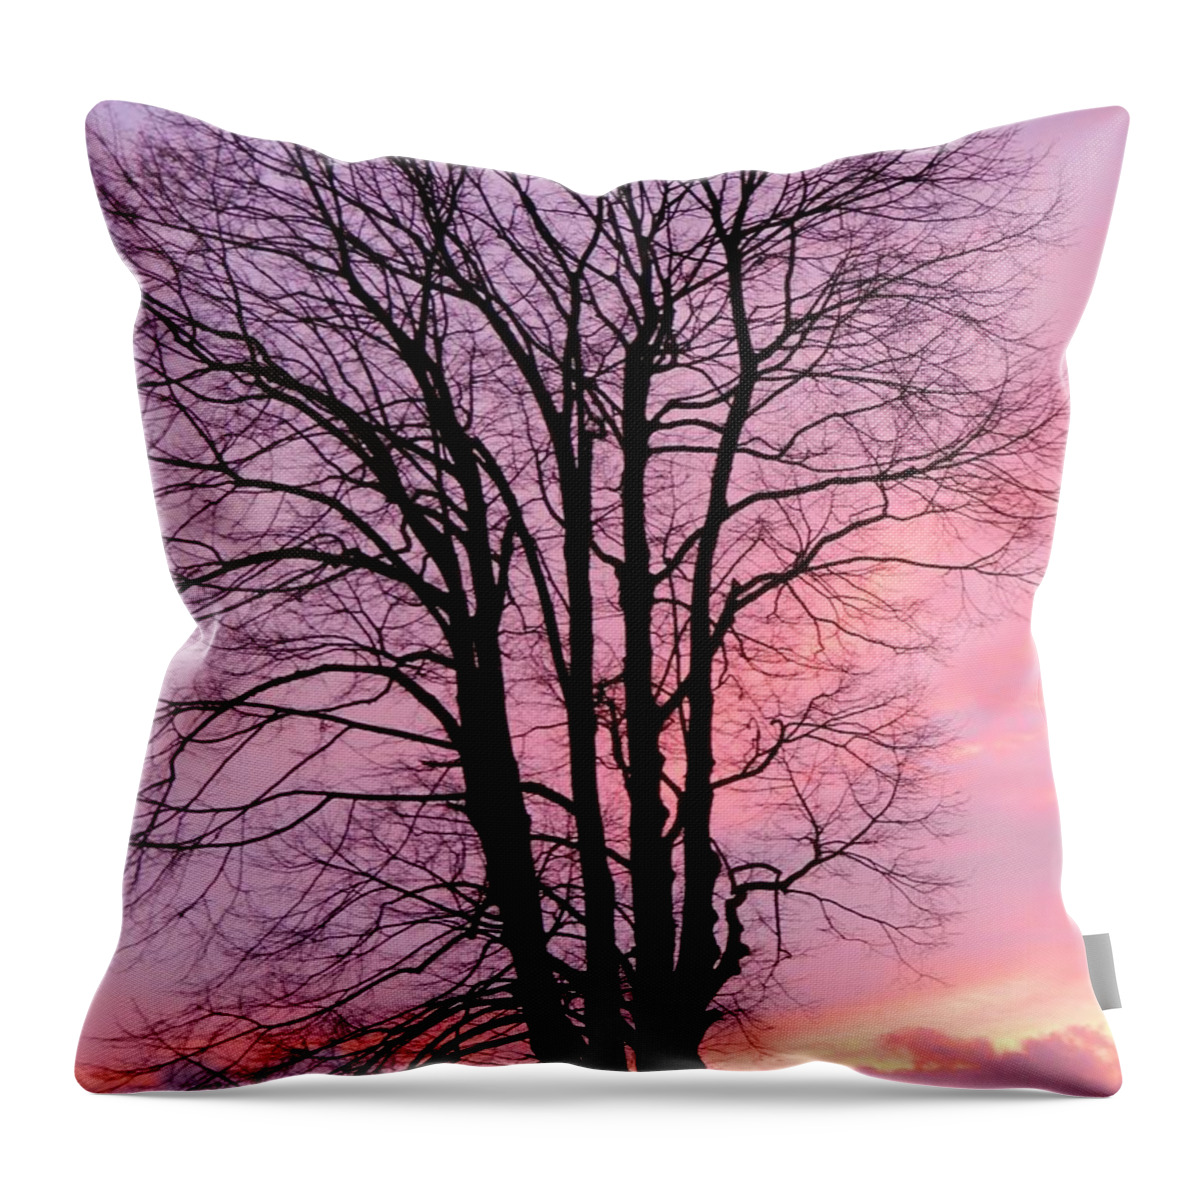 Sunset Throw Pillow featuring the photograph Winter Sunset by Gallery Of Hope 